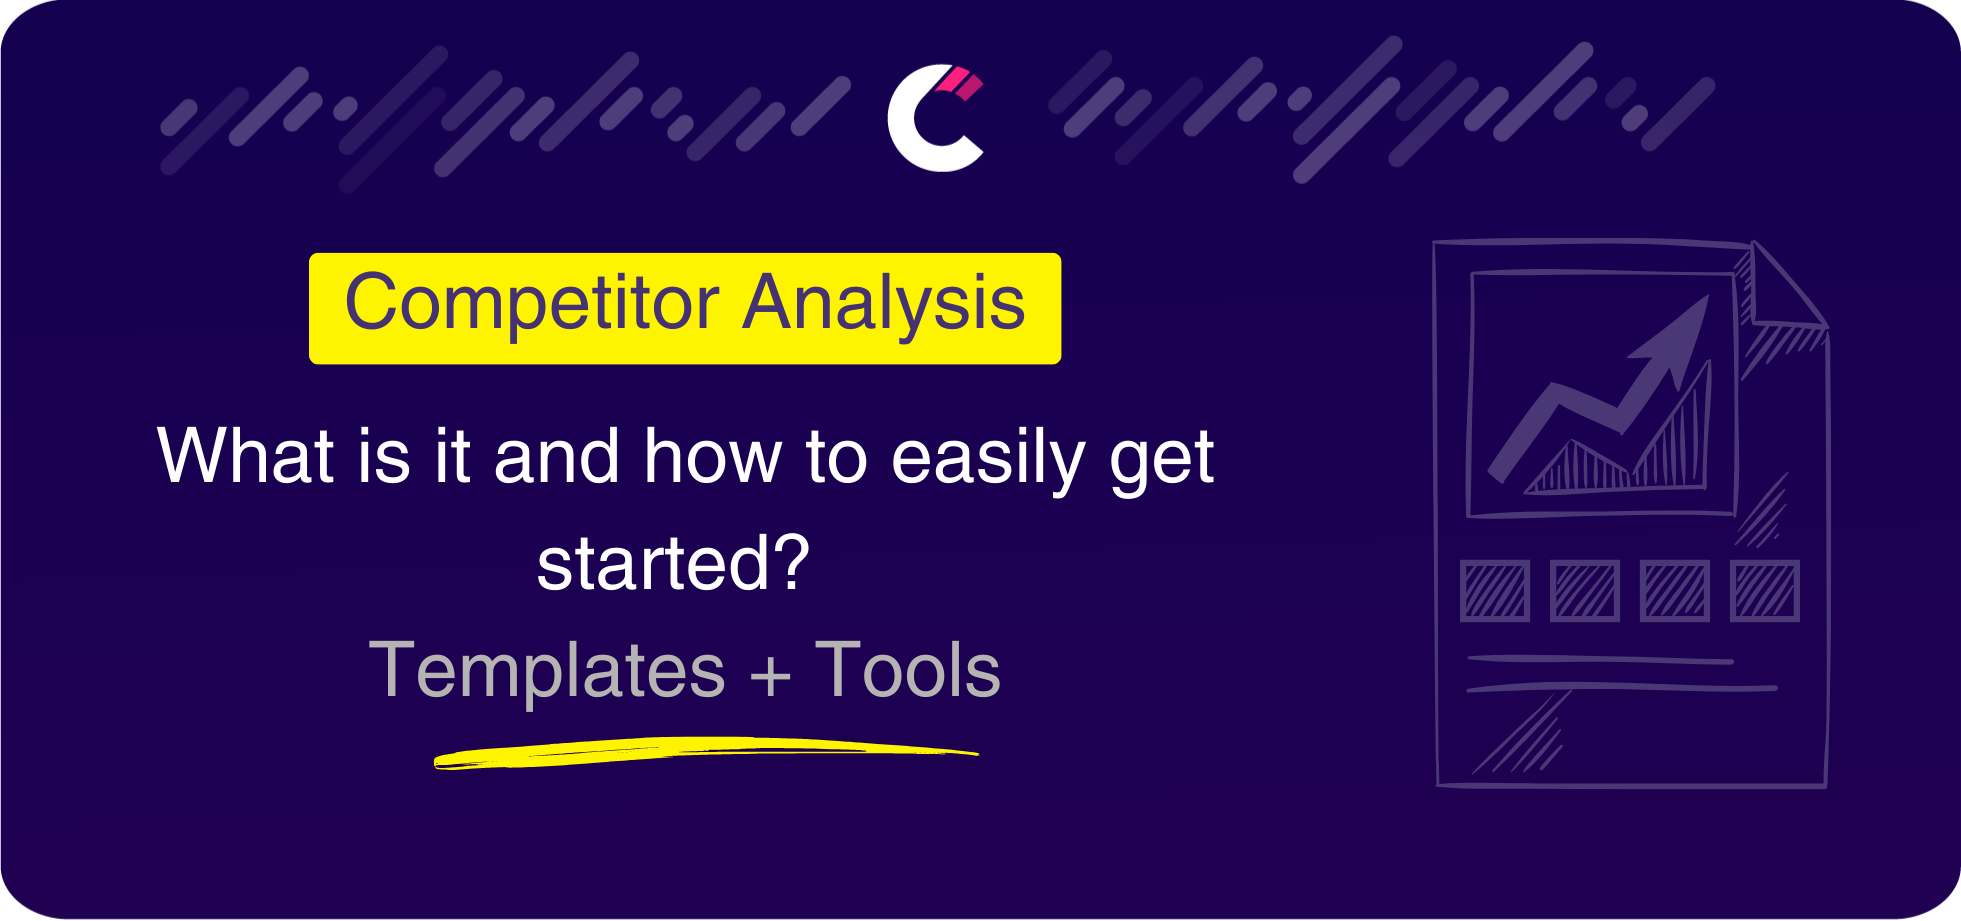 Competitive Analysis - What is it and how to get started?